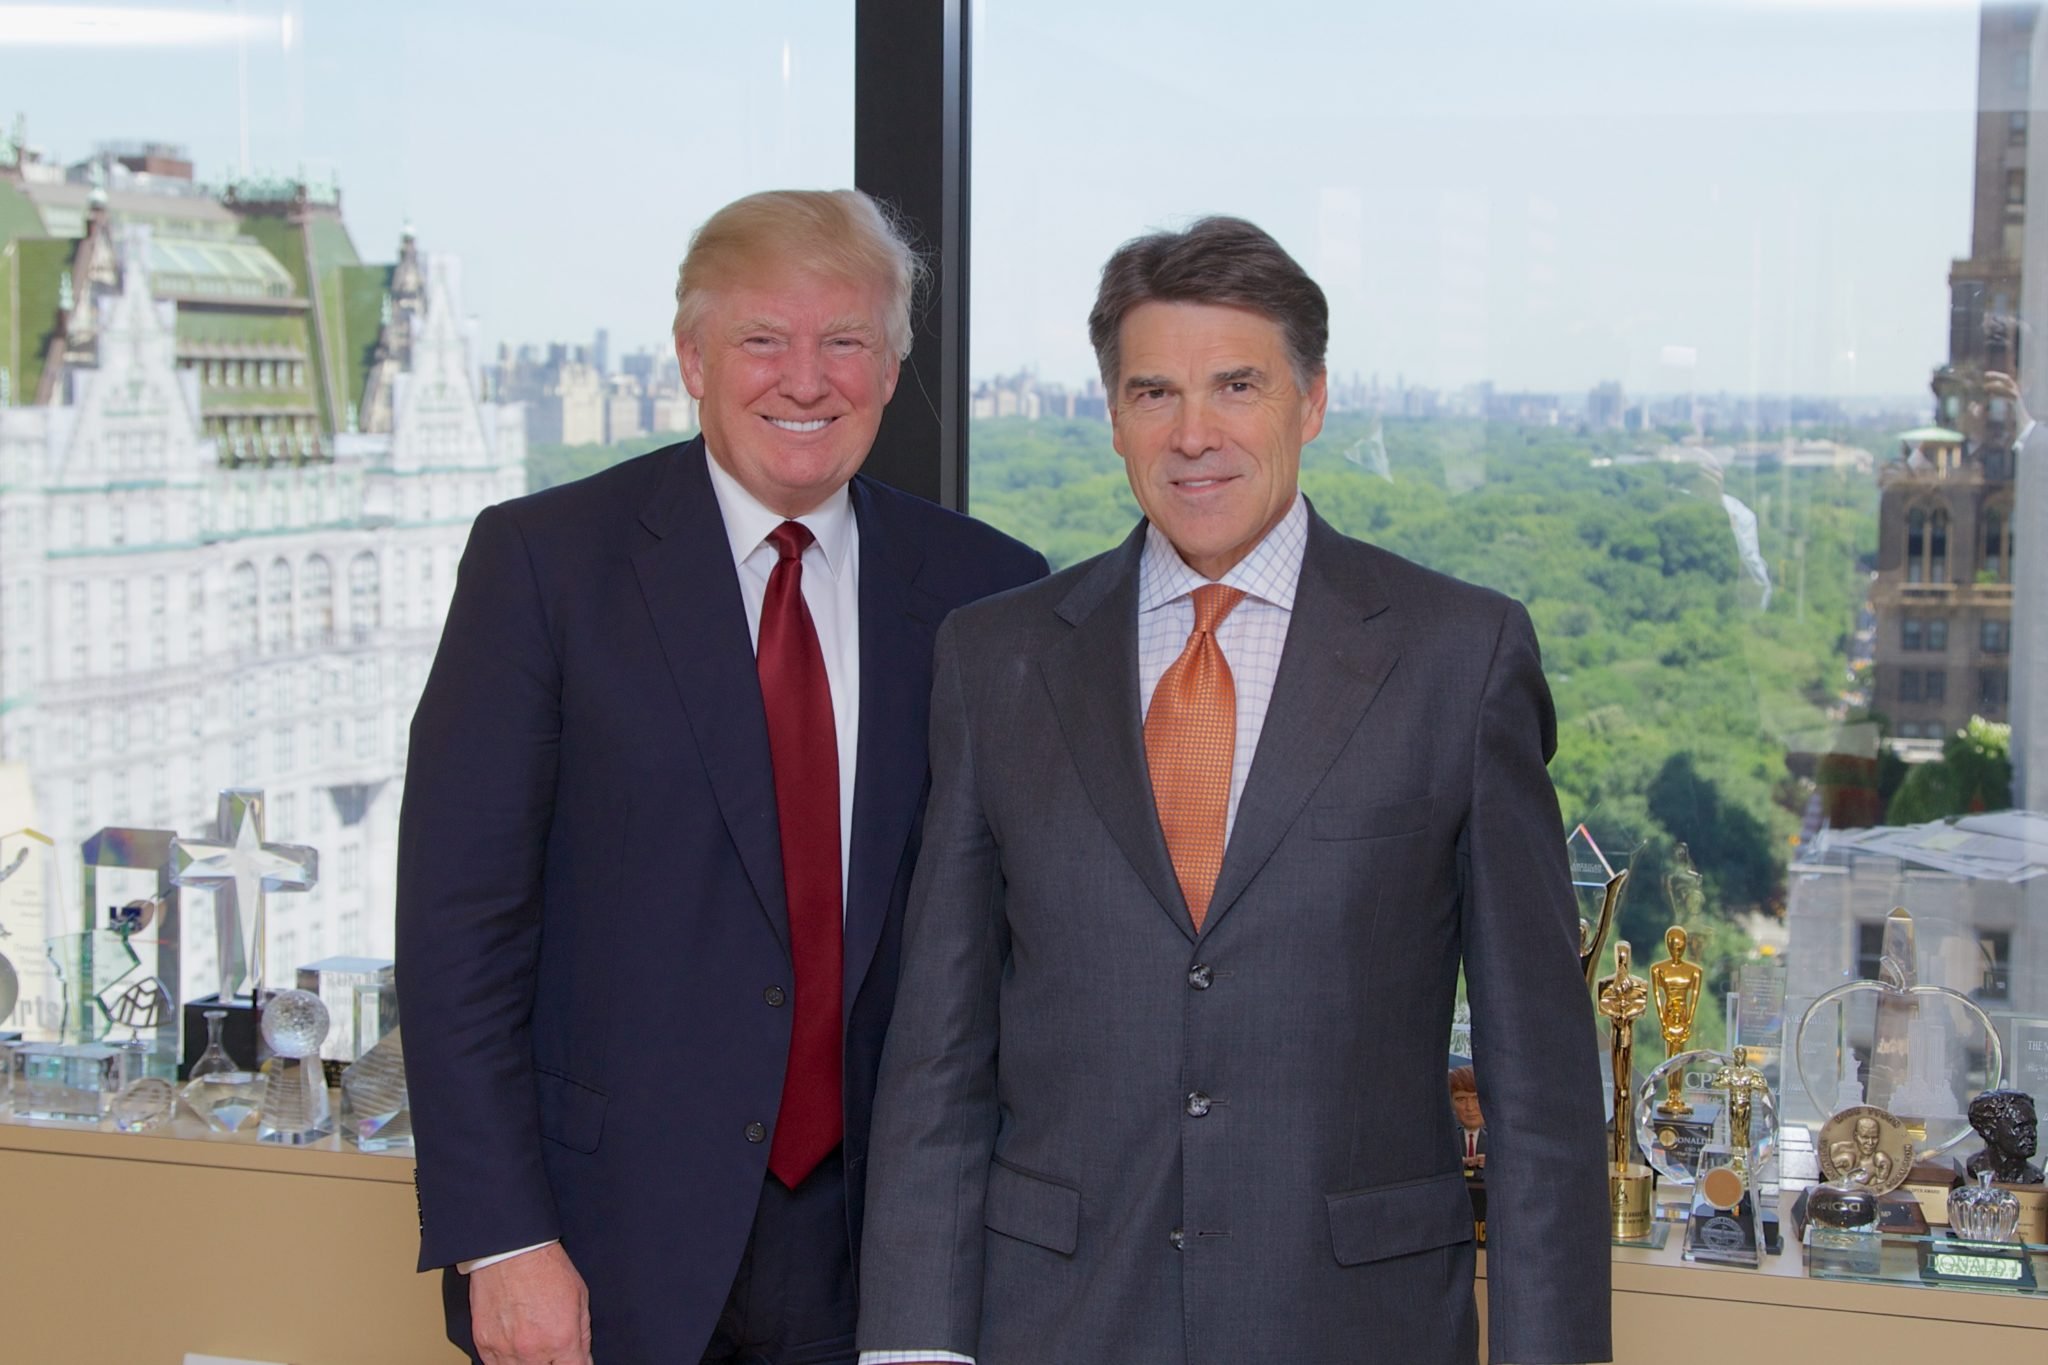 Donald Trump and Rick Perry